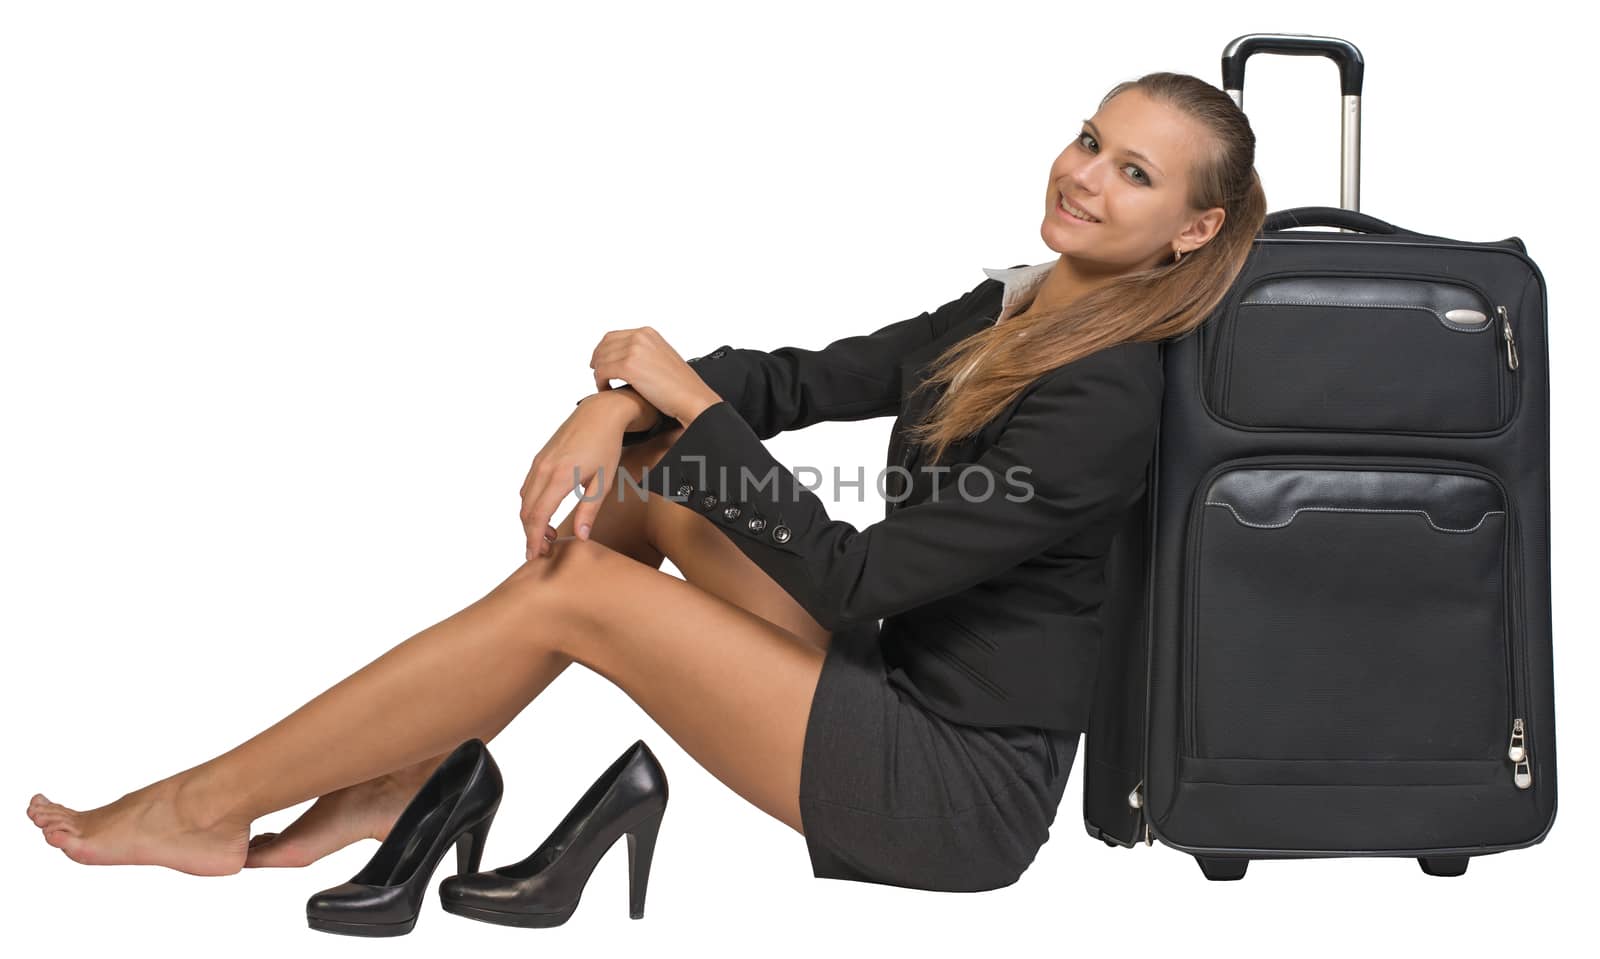 Businesswoman with her shoes off sitting next to front view suitcase with extended handle, looking at camera, smiling. Isolated over white background